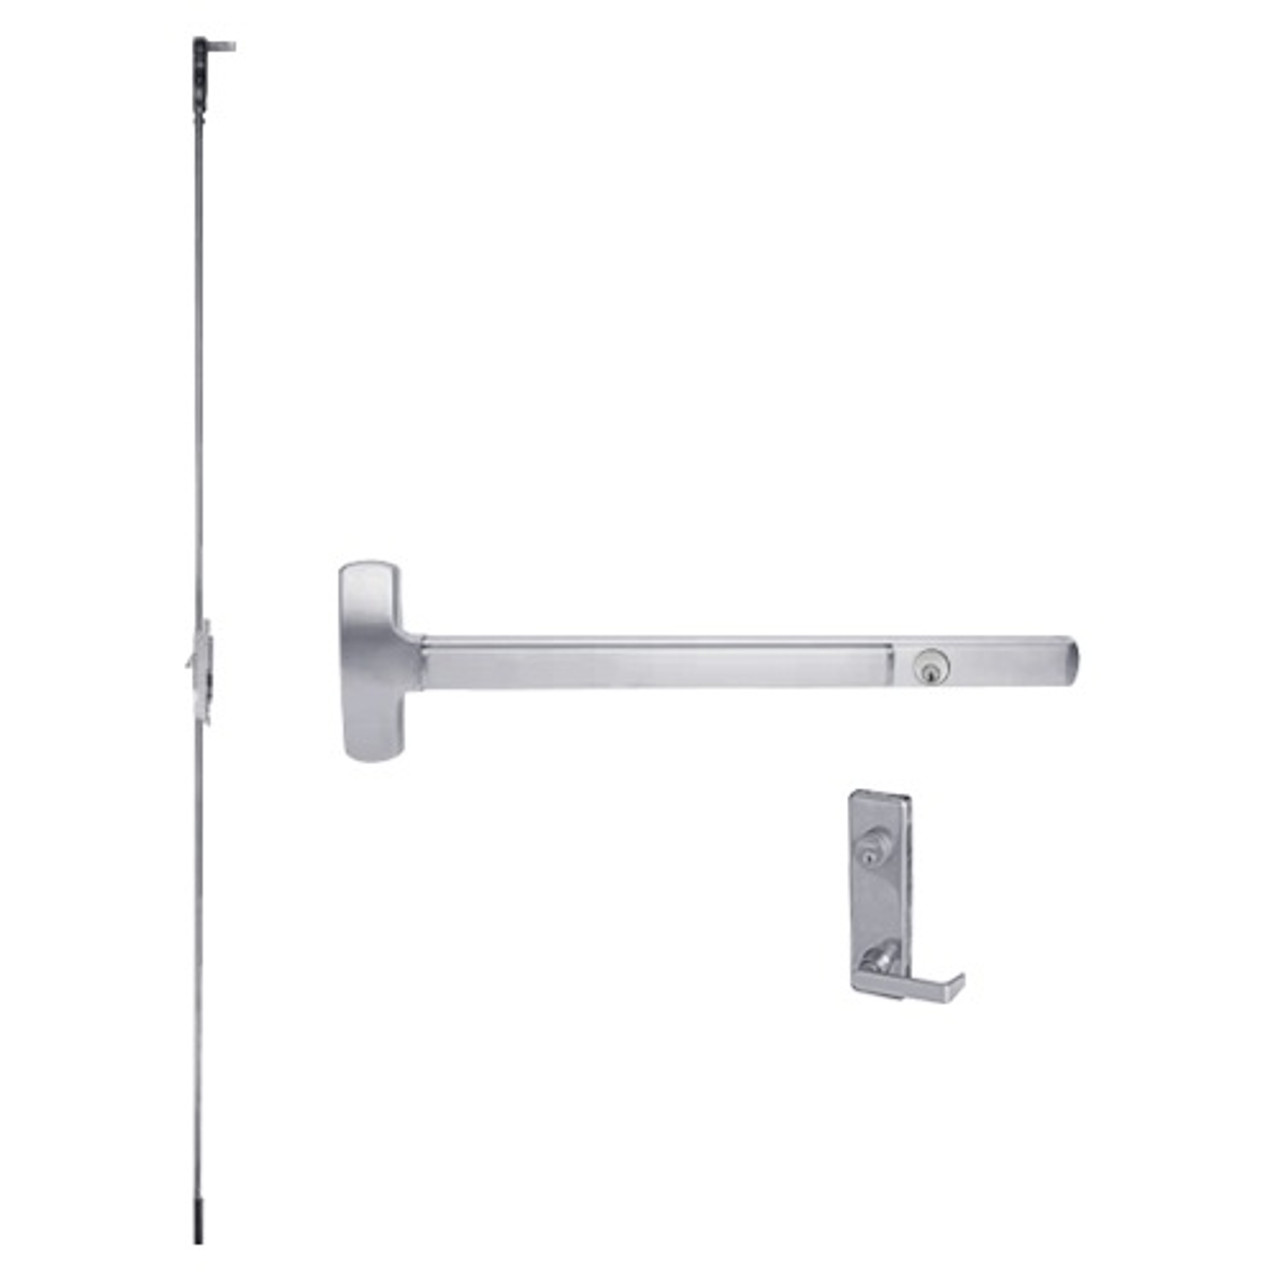 CD25-C-L-DANE-US32-4-RHR Falcon Exit Device in Polished Stainless Steel